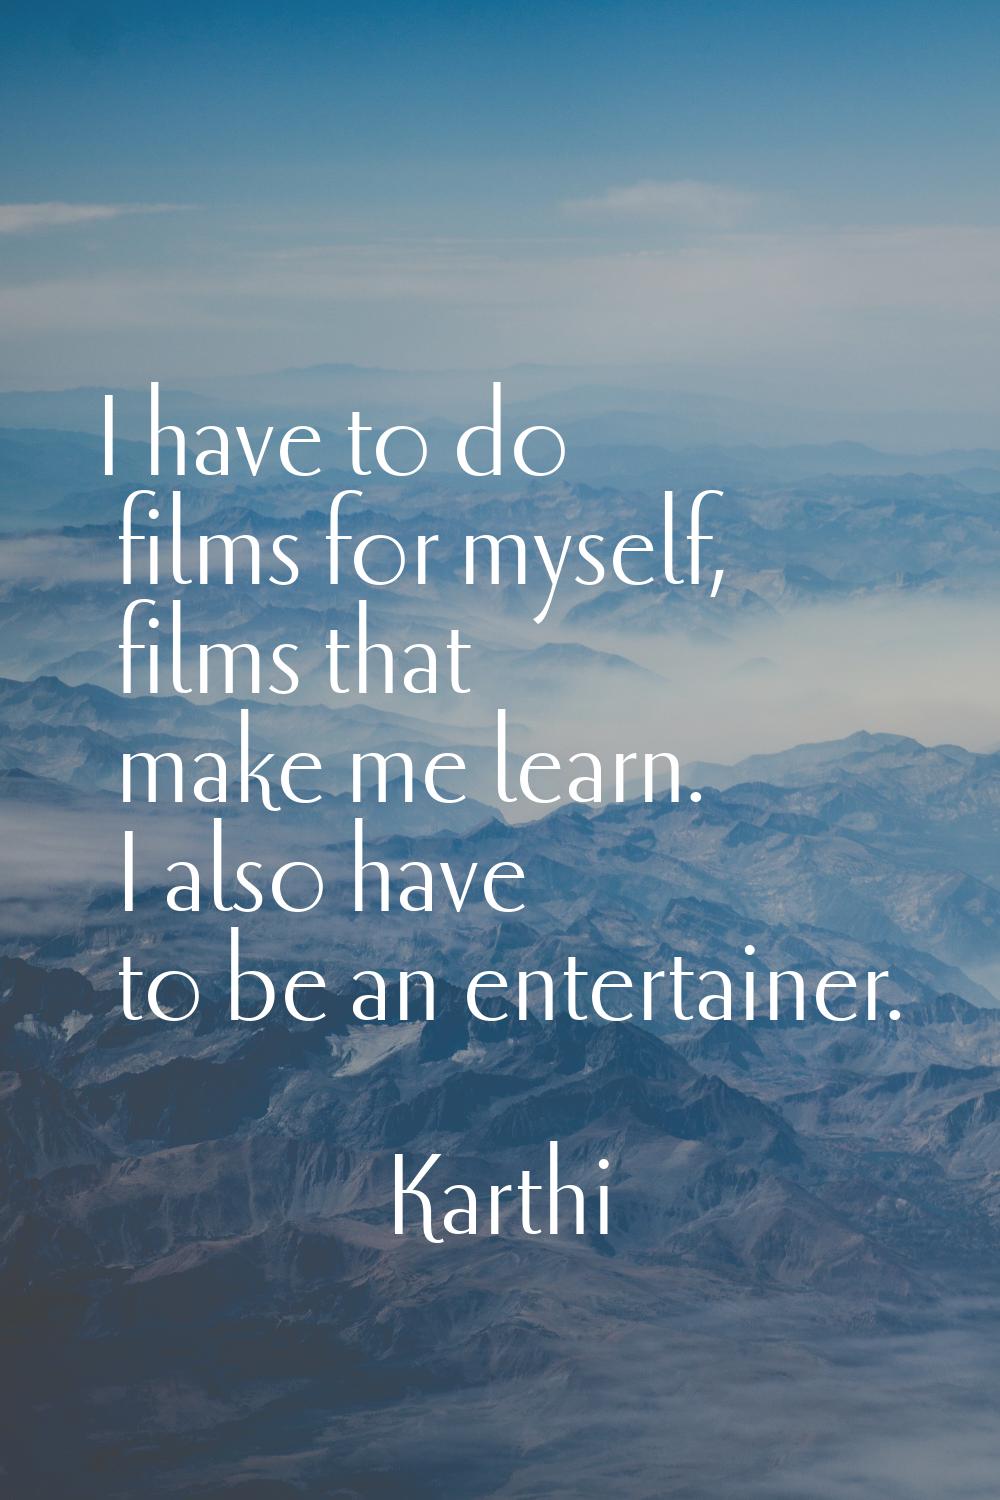 I have to do films for myself, films that make me learn. I also have to be an entertainer.